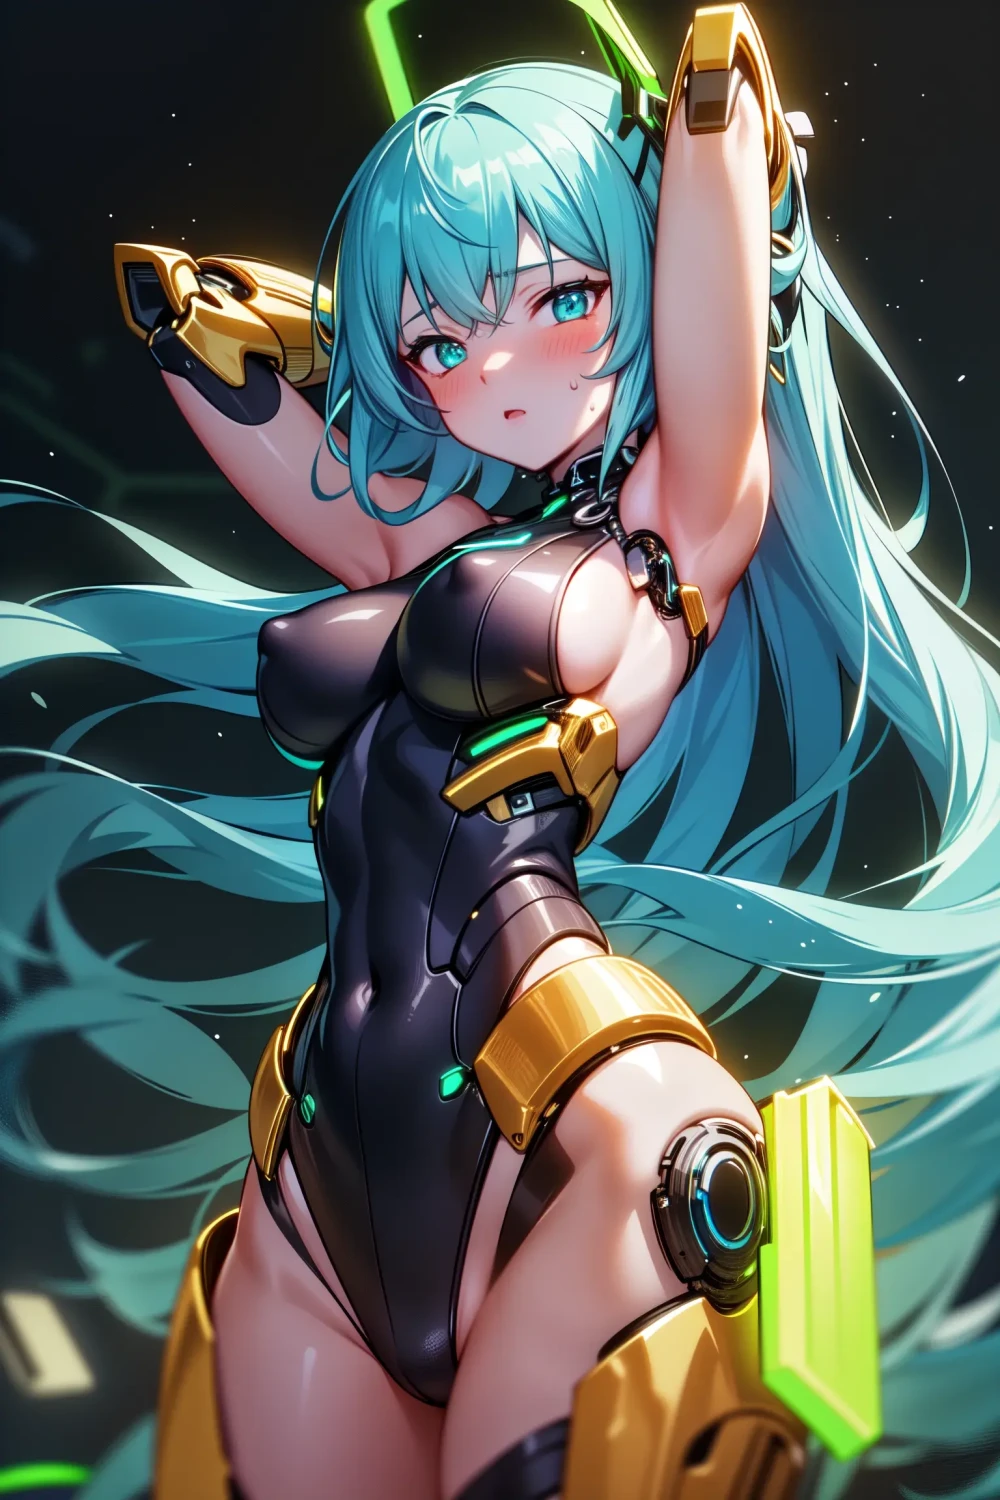 hatsune-miku-anime-style-all-ages-14